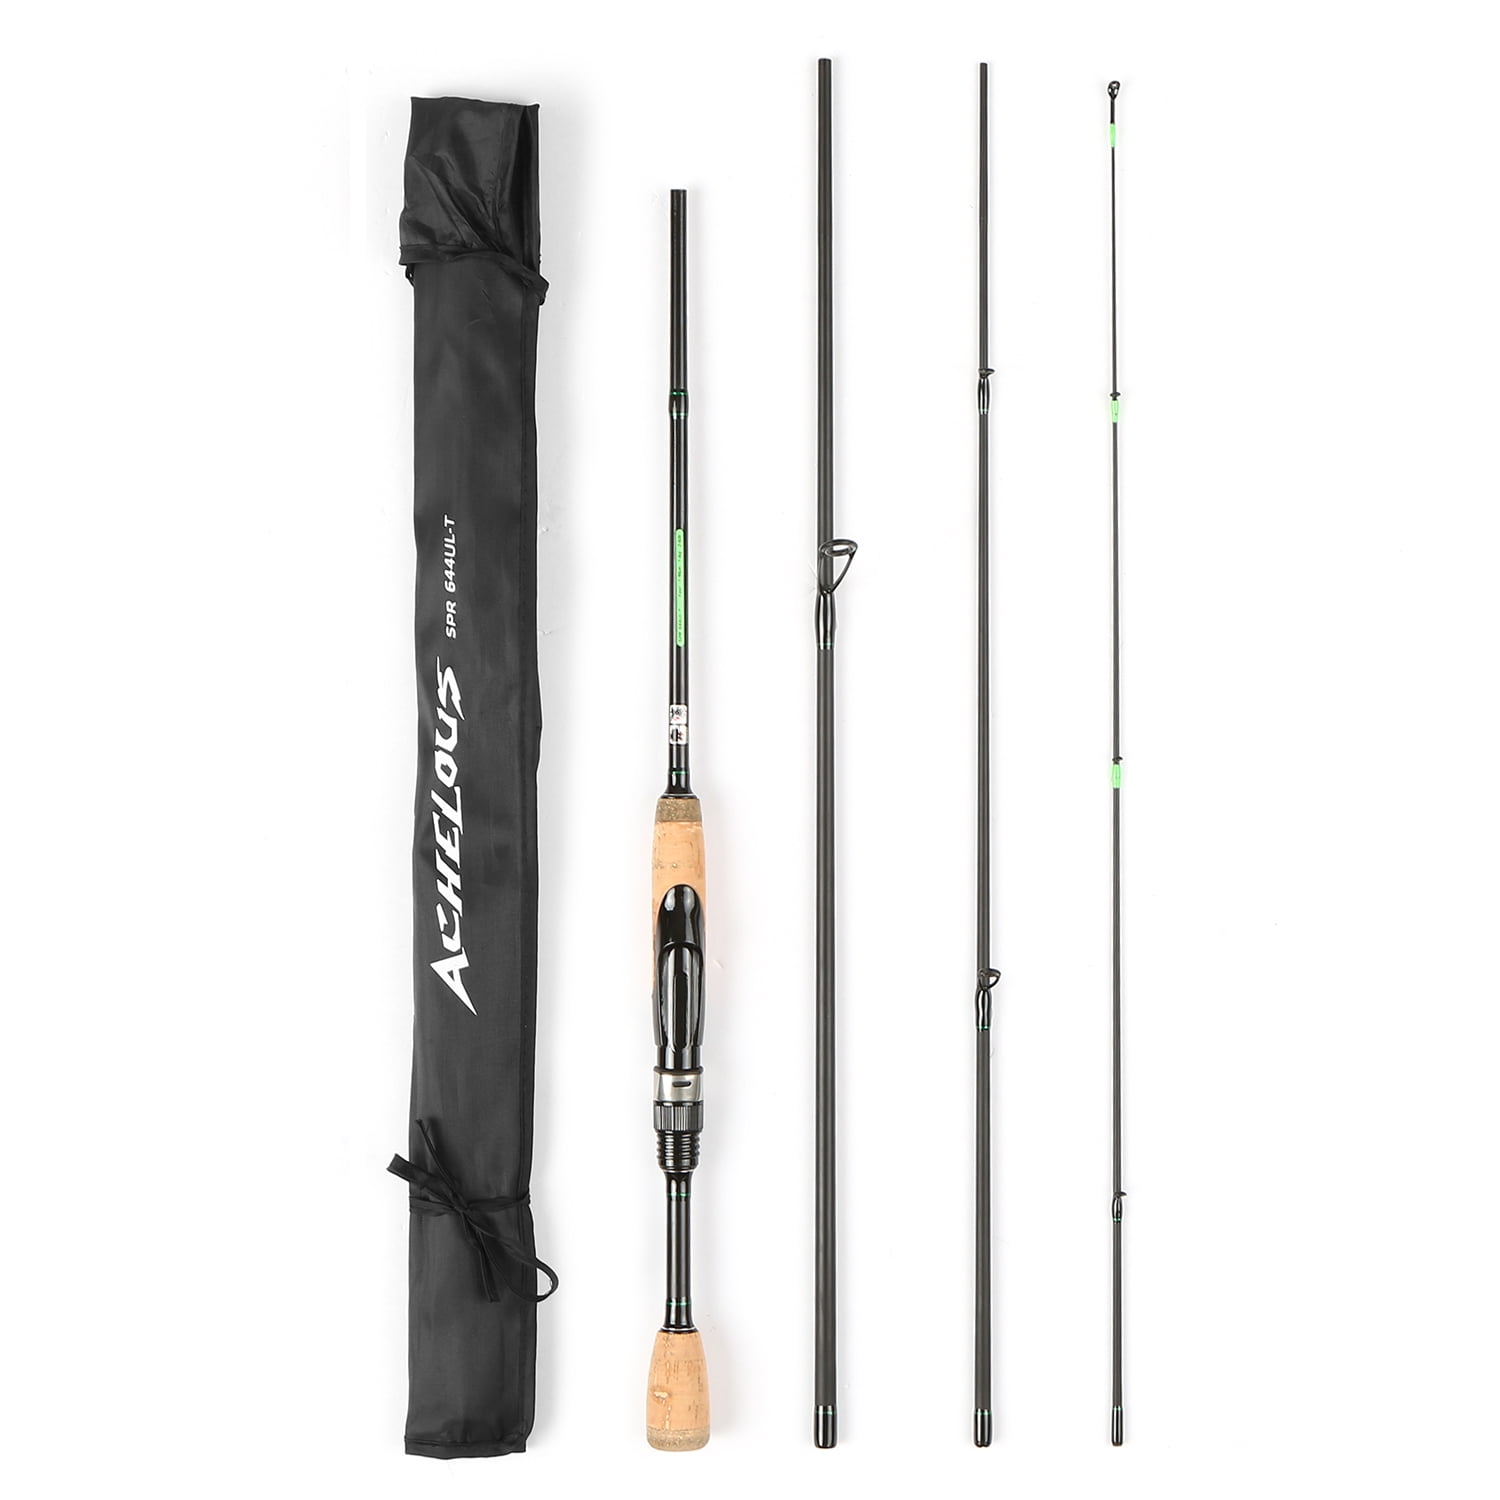 Travel Spinning Fishing Rod with Tube Case,Lightweight 4 Piece Lure Rod Pole 